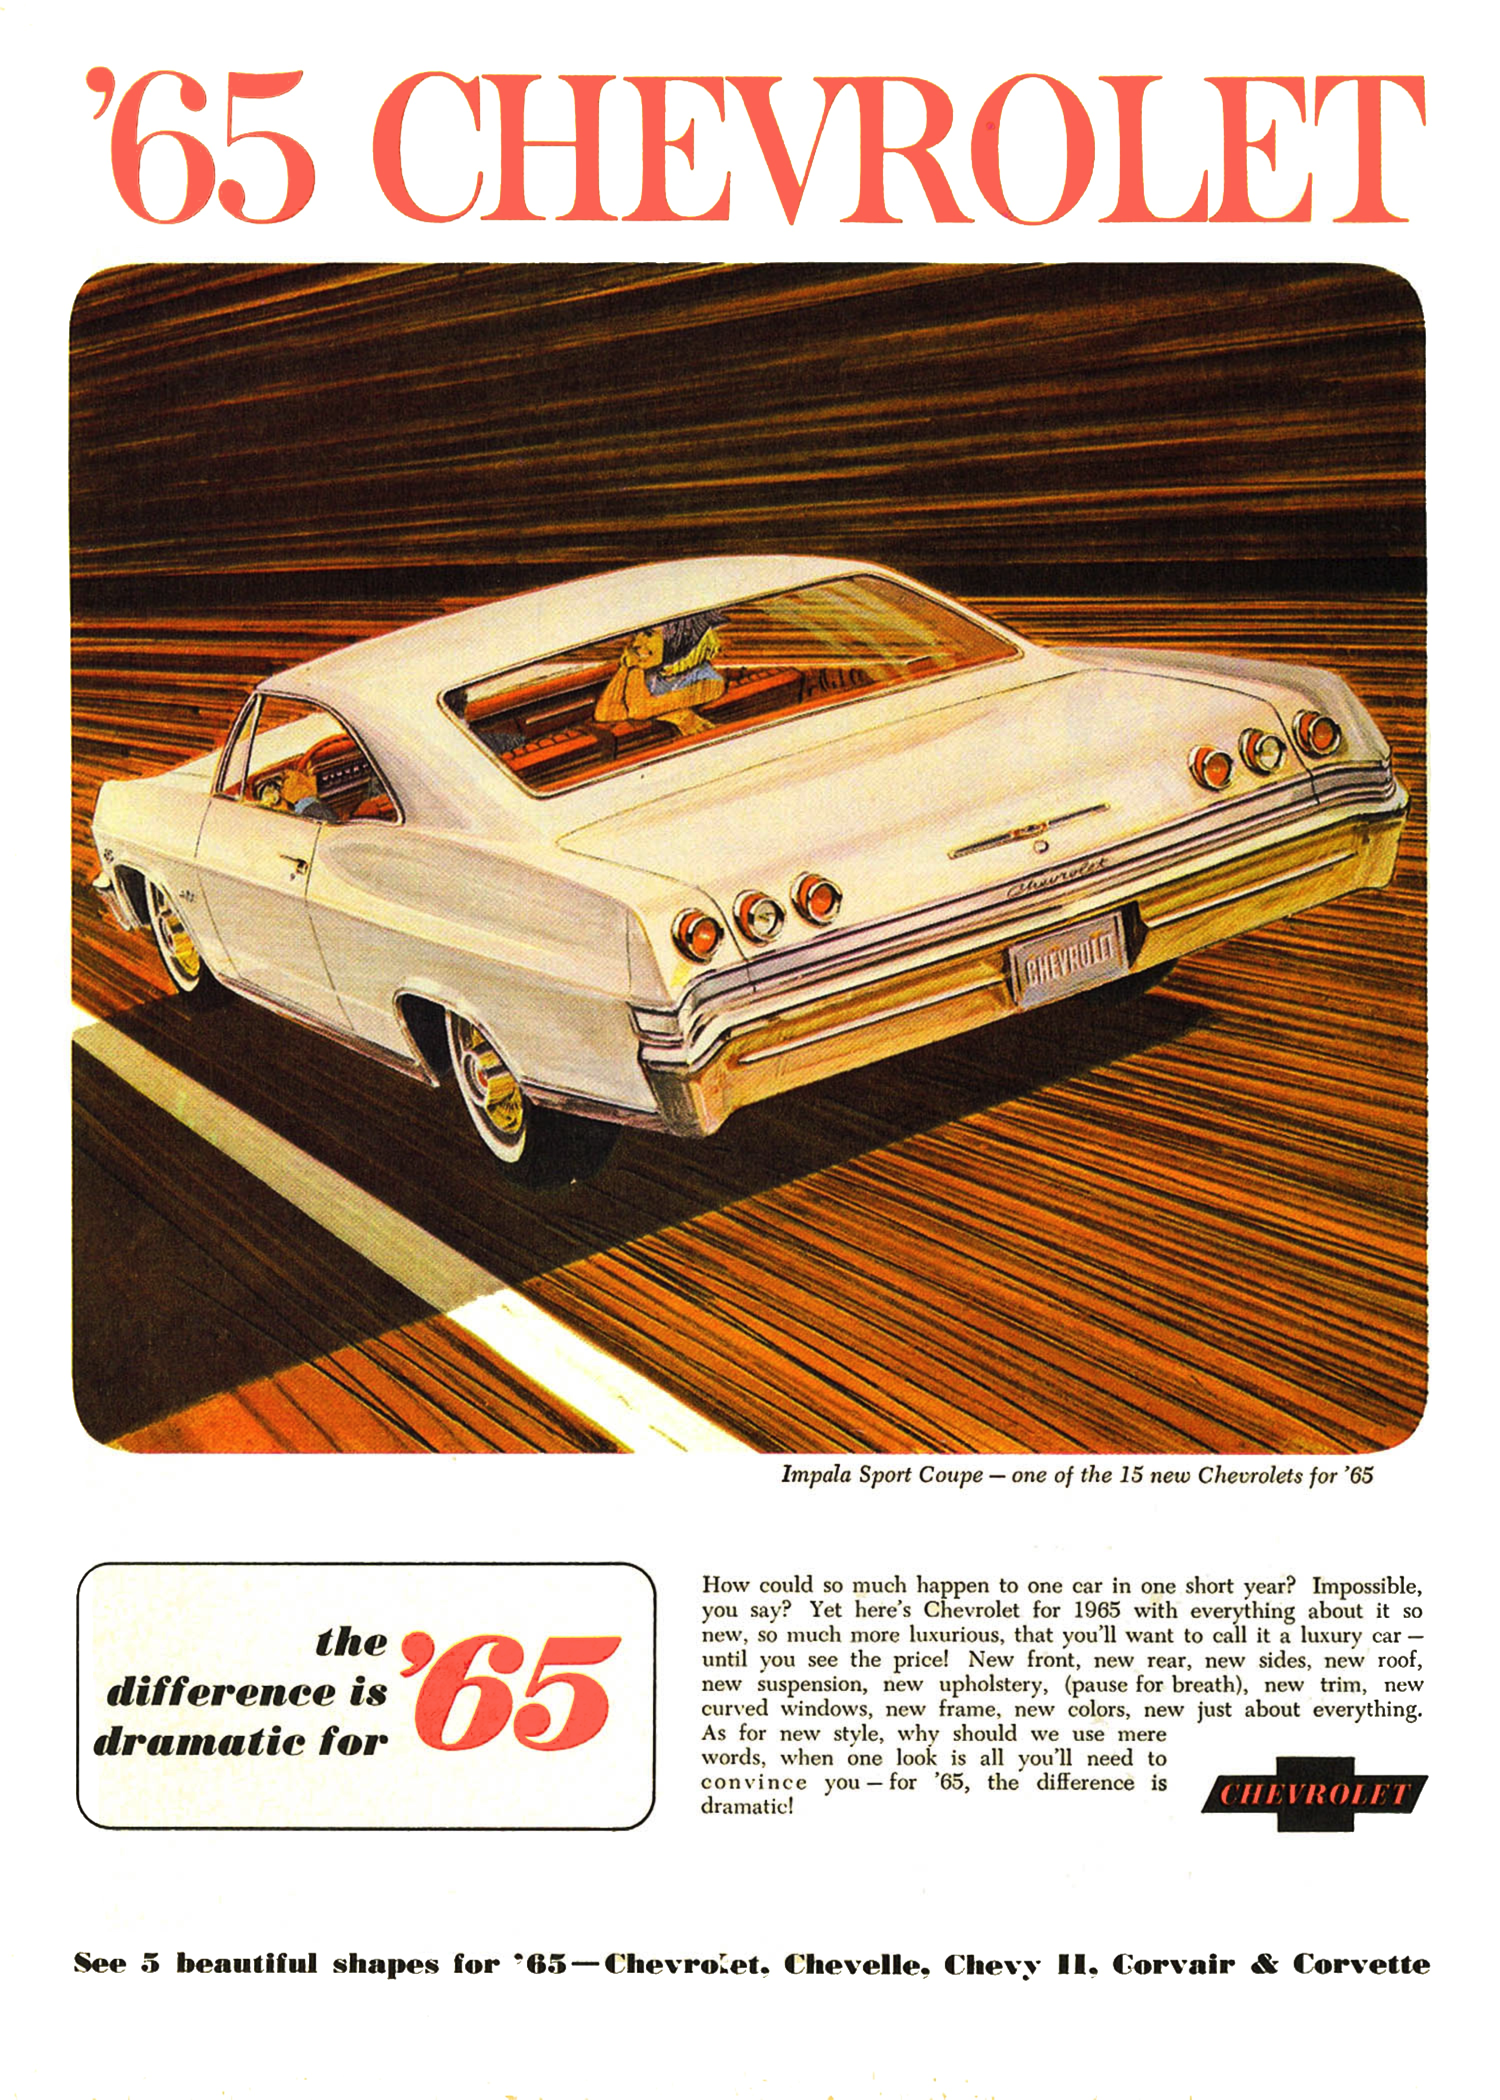 1965 Chevrolet Ad, Impala Sport Coupe "The difference is dramatic for '65"